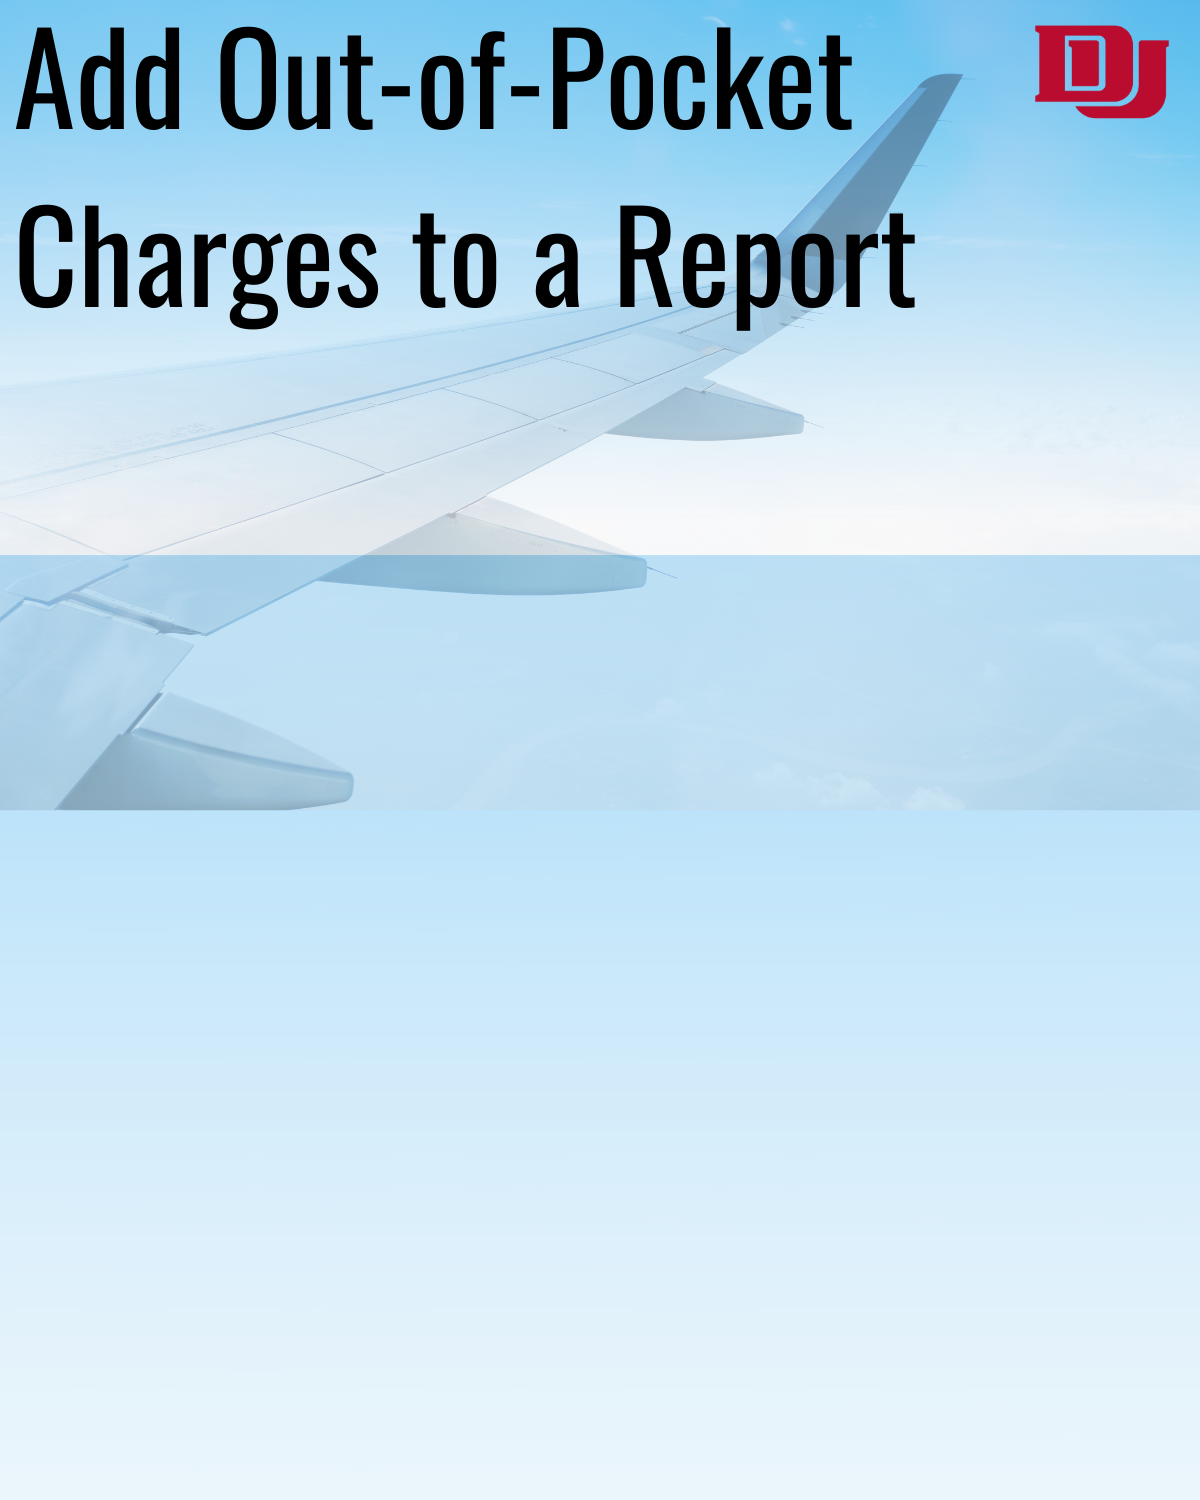 Add Out-of-Pocket Reimbursement Charge to a Report